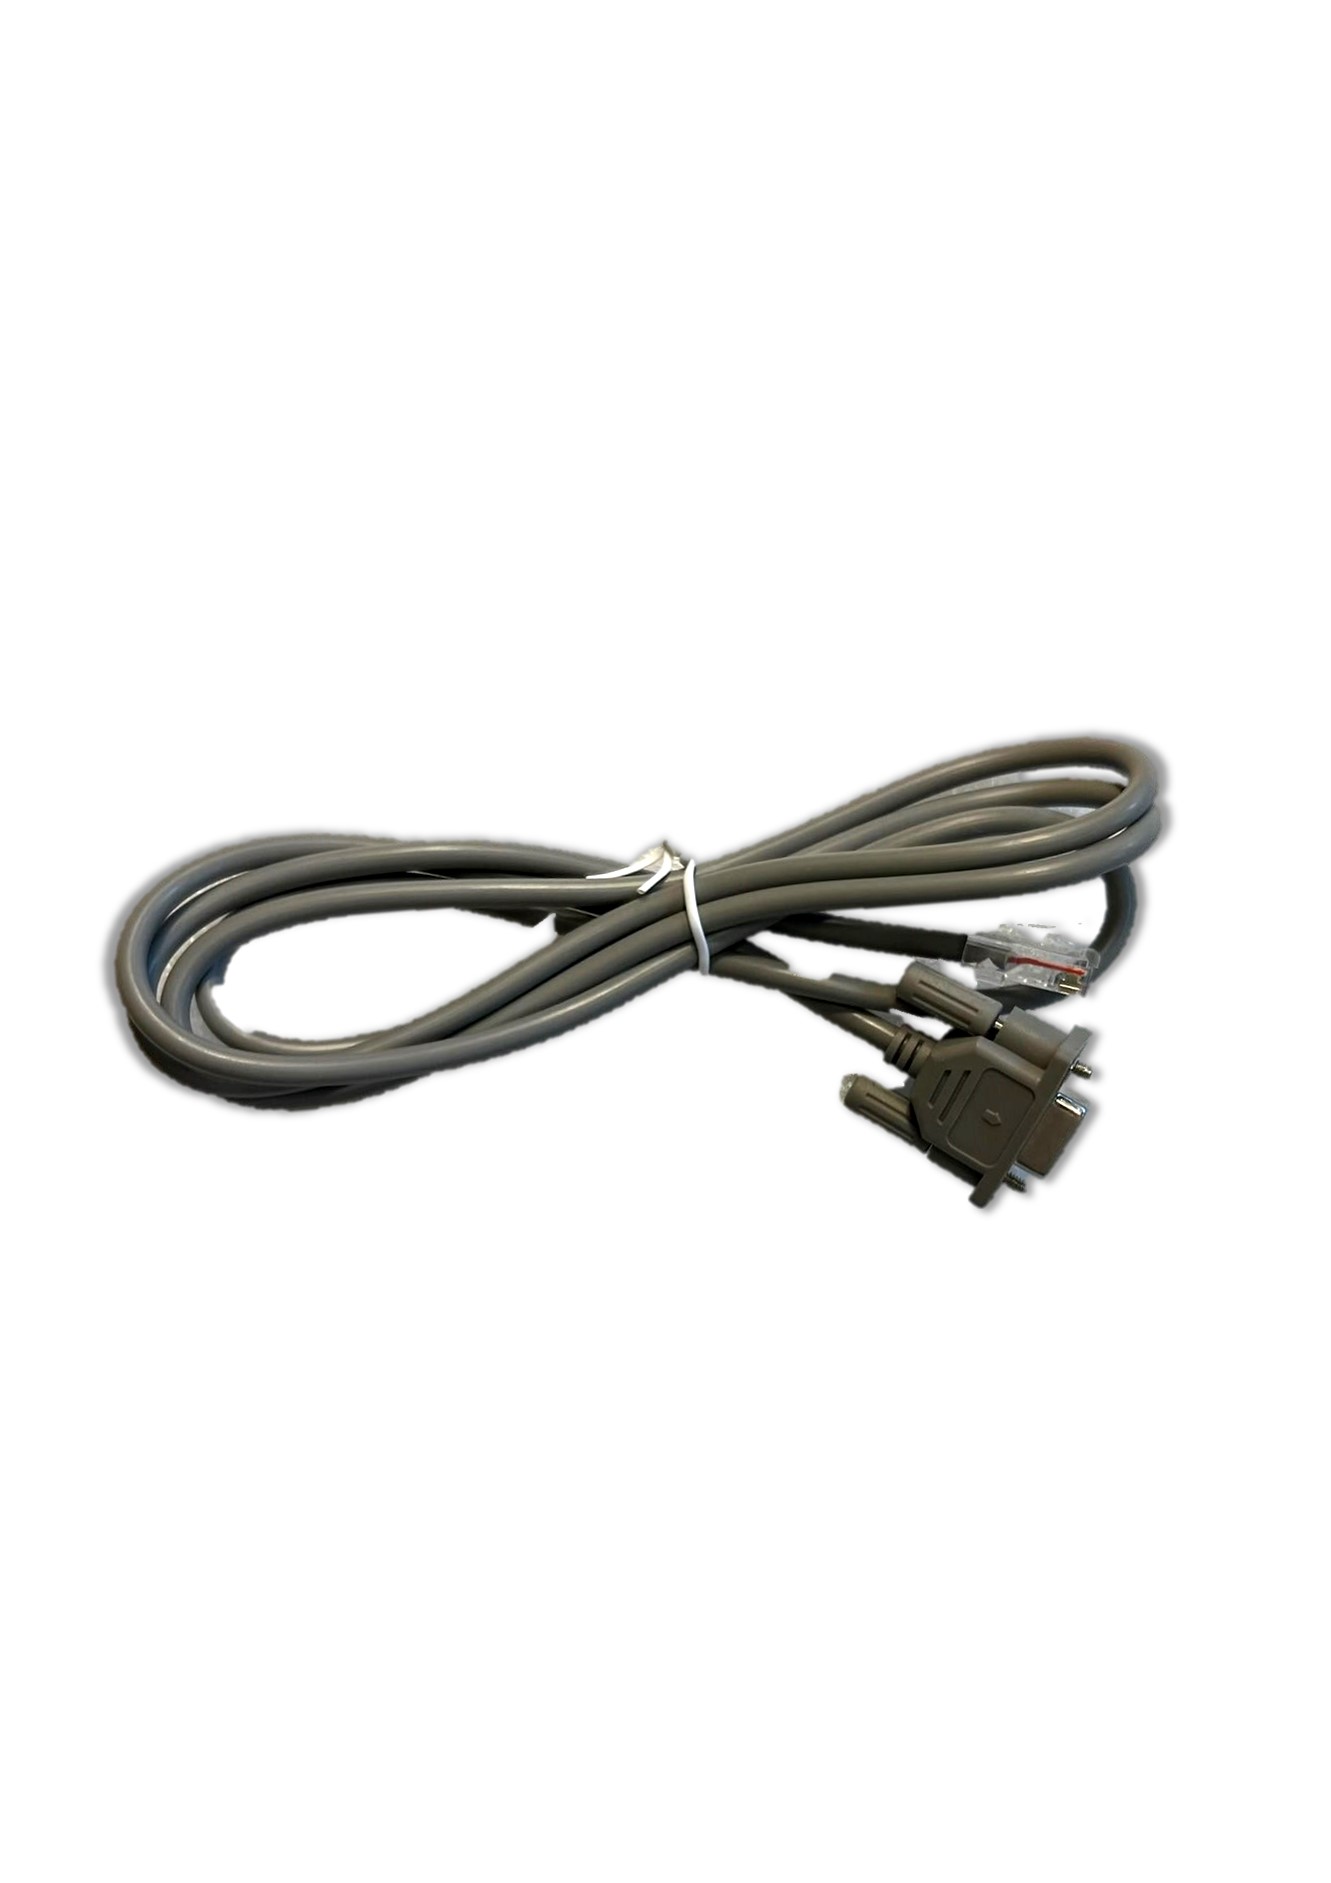 WI-FI Module RS232 Cable